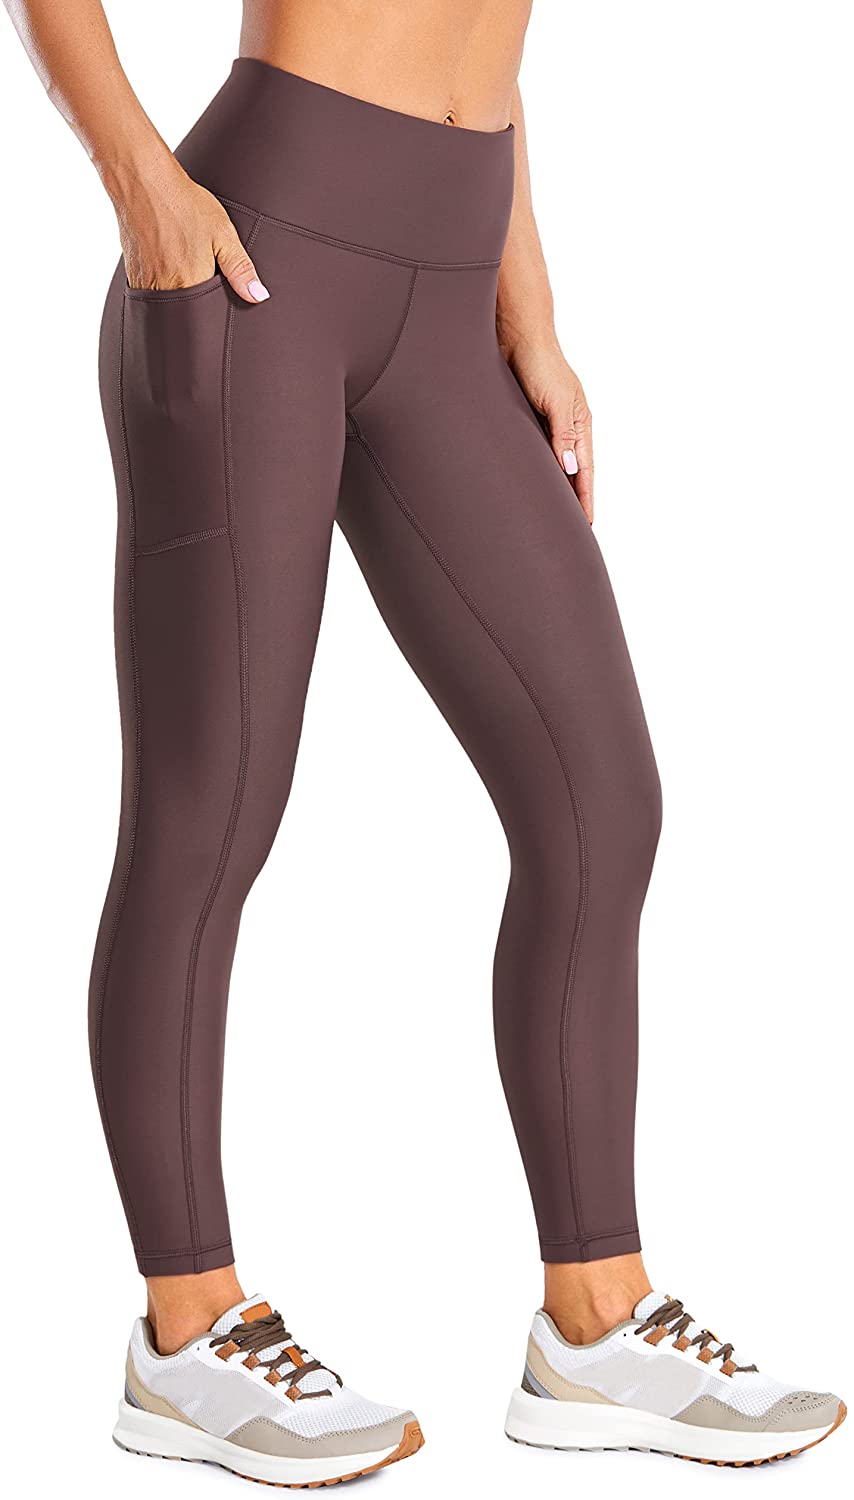 CRZ YOGA Women's Thermal Fleece Lined Leggings 25 Inches - High Waisted  Winter W